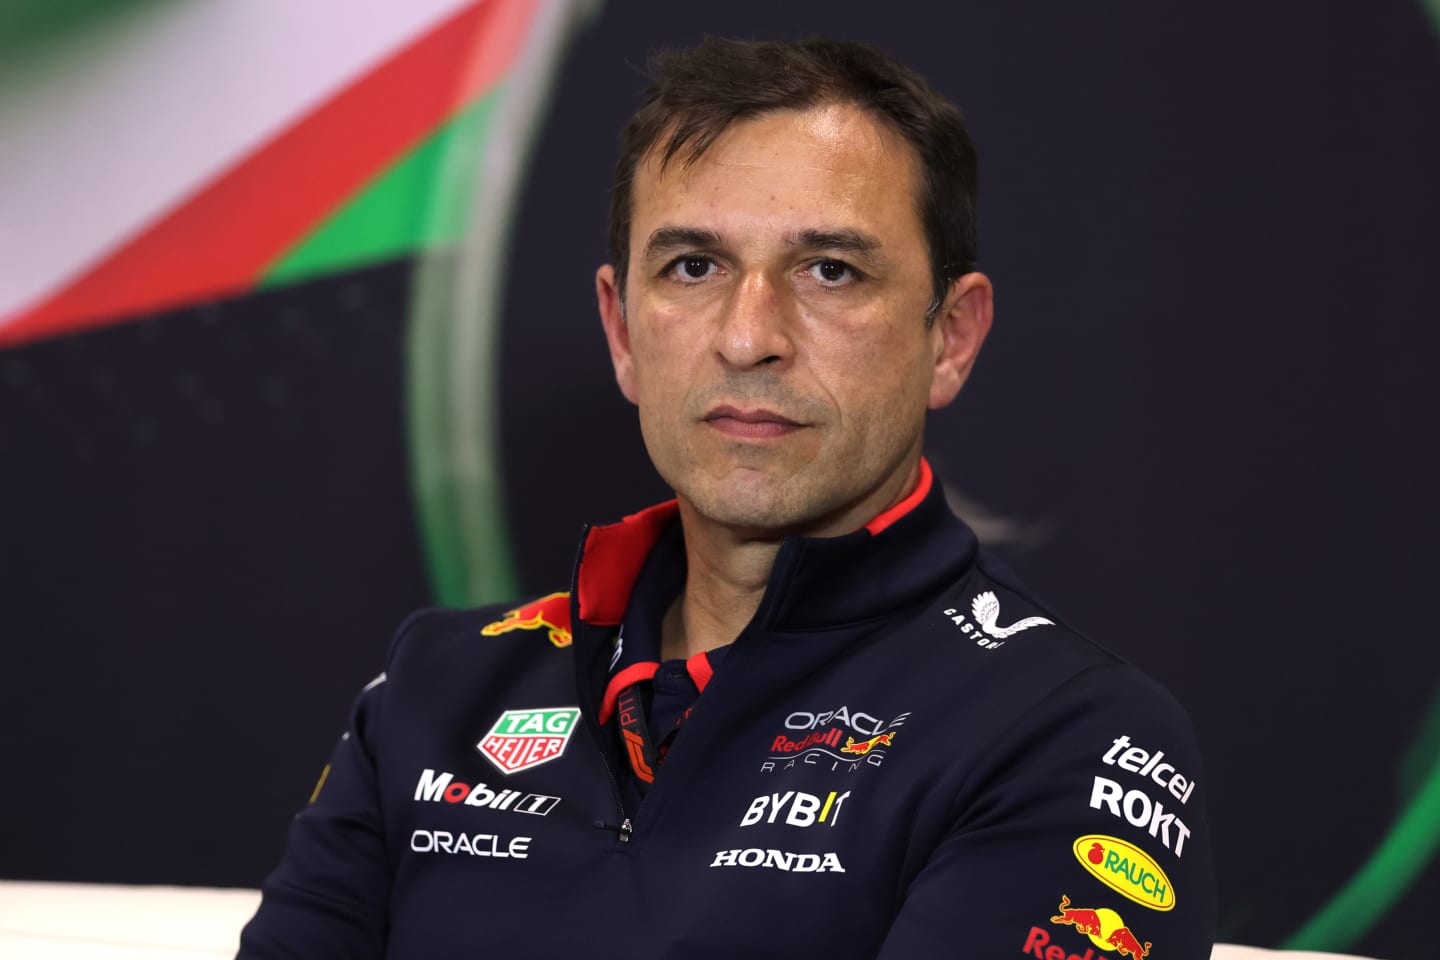 IMOLA, ITALY - MAY 17: Pierre Wache, Chief Engineer of Performance Engineering at Oracle Red Bull Racing attends the Team Principals Press Conference during practice ahead of the F1 Grand Prix of Emilia-Romagna at Autodromo Enzo e Dino Ferrari Circuit on May 17, 2024 in Imola, Italy. (Photo by Bryn Lennon/Getty Images)